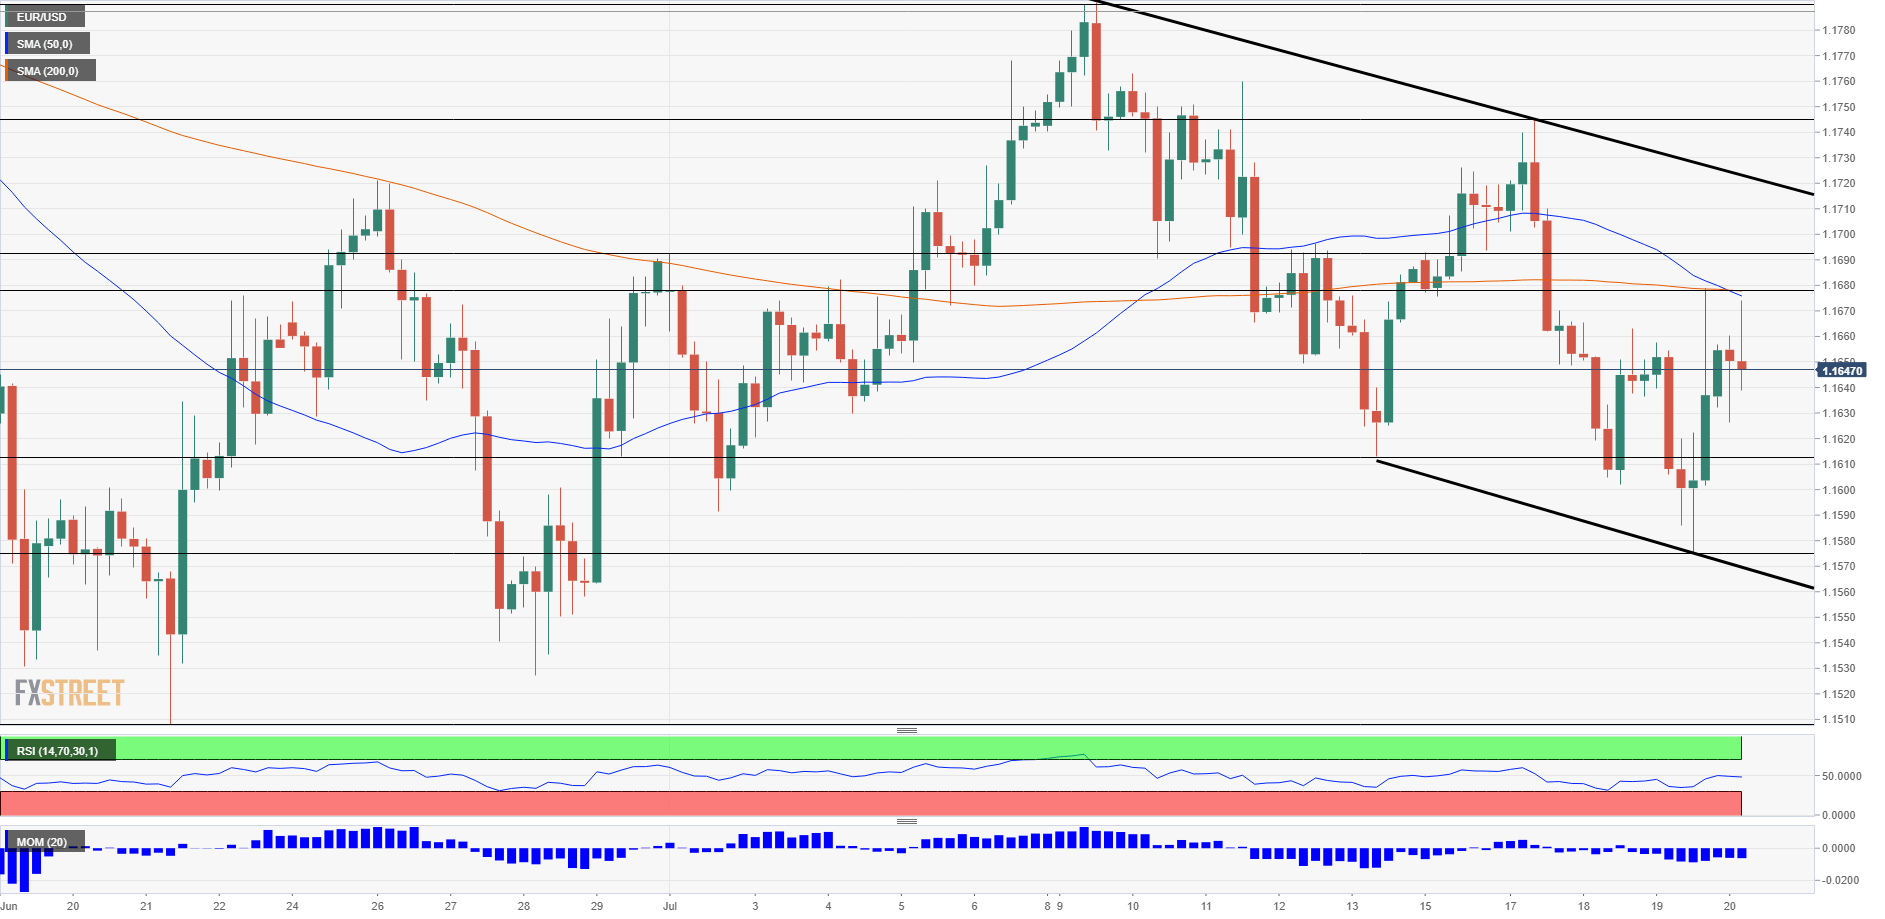 EUR USD Technical Analysis July 20 2018